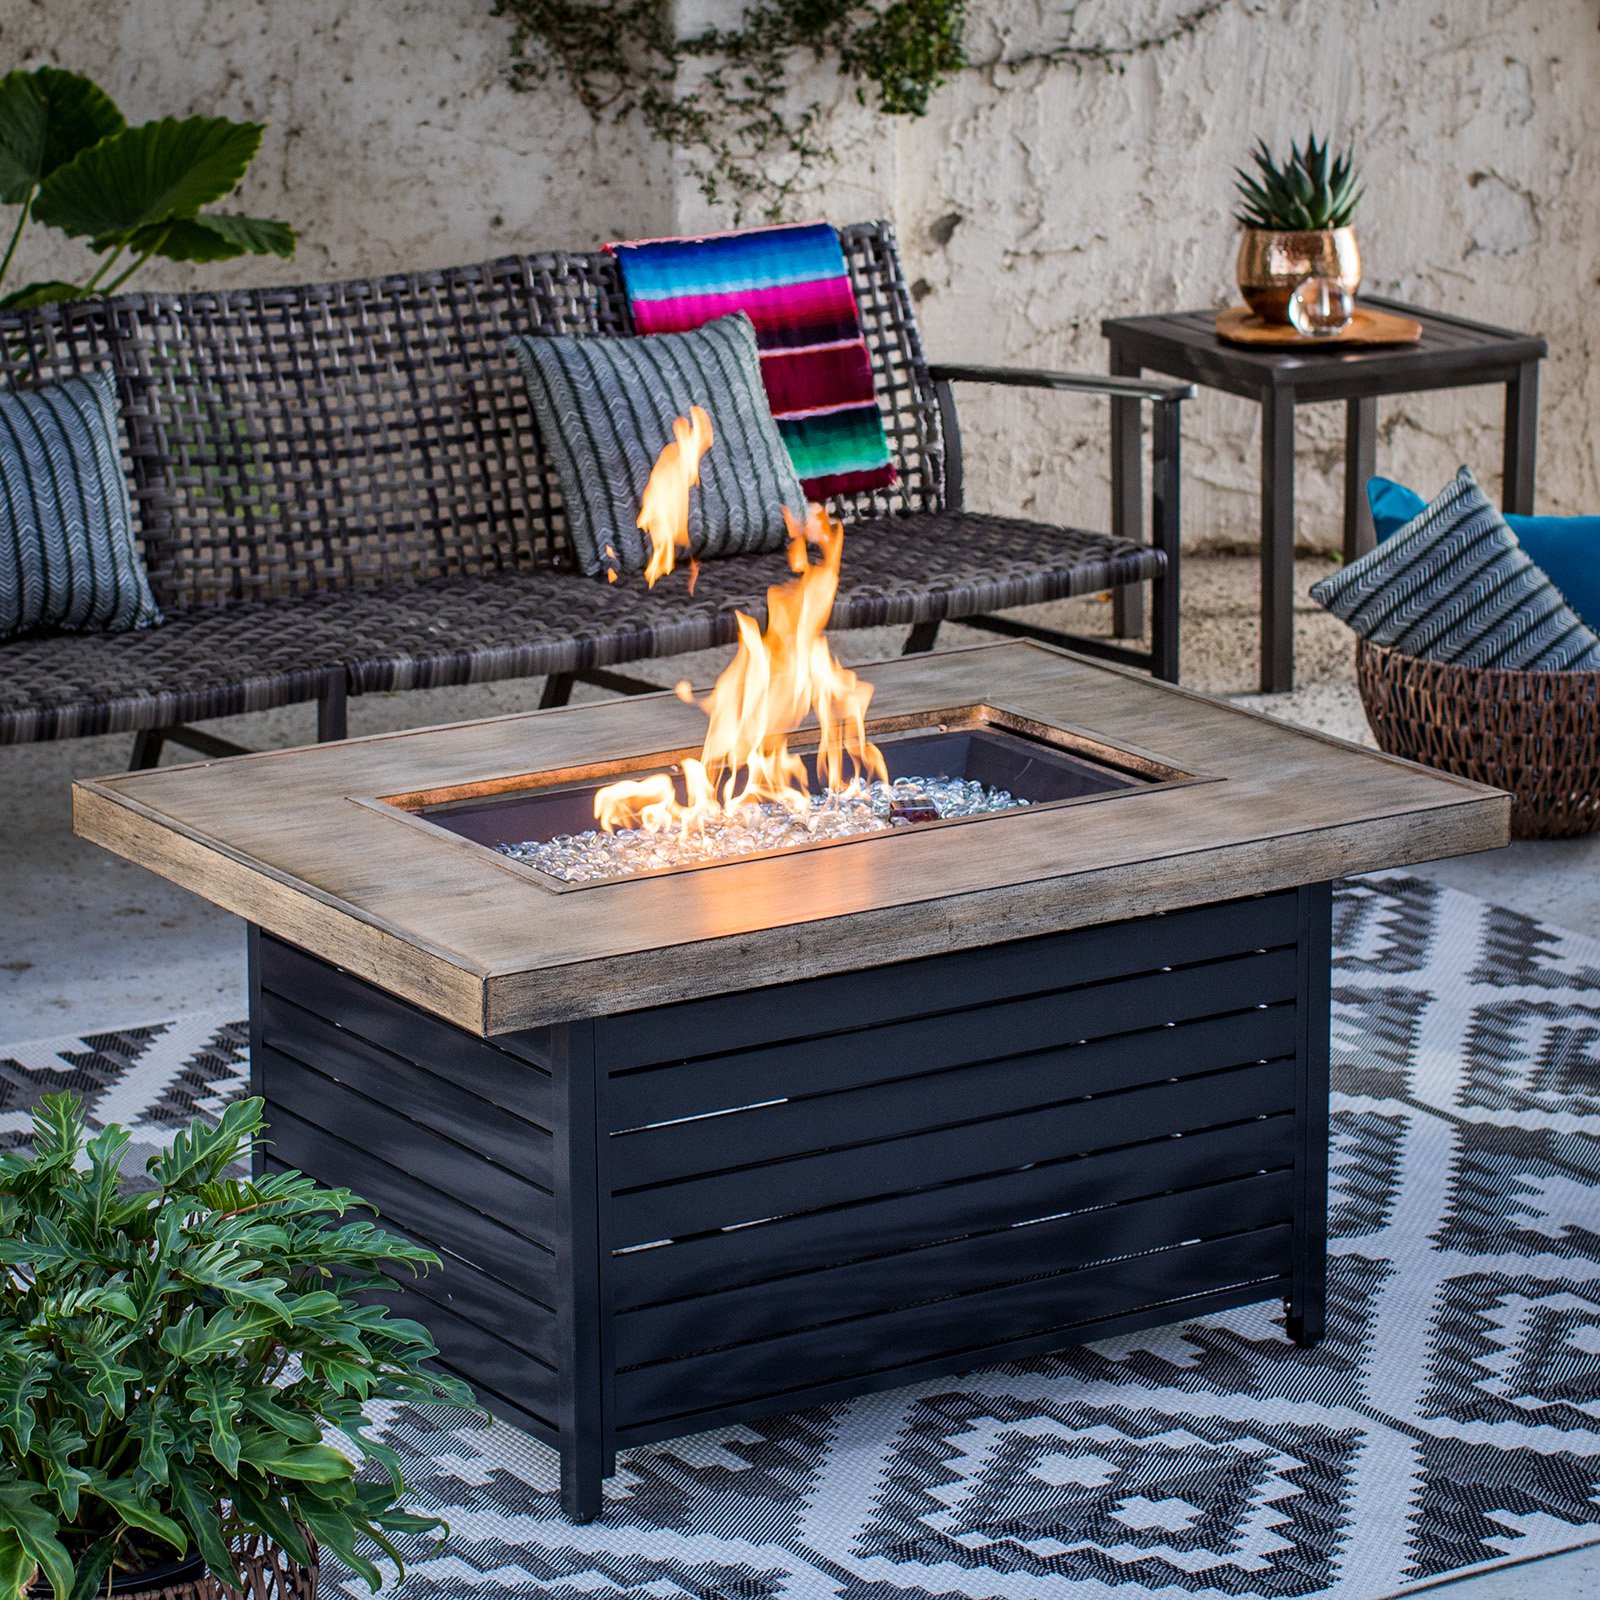 Red Ember Seeley Lake Gas Fire Table, Red Ember Fire Pit